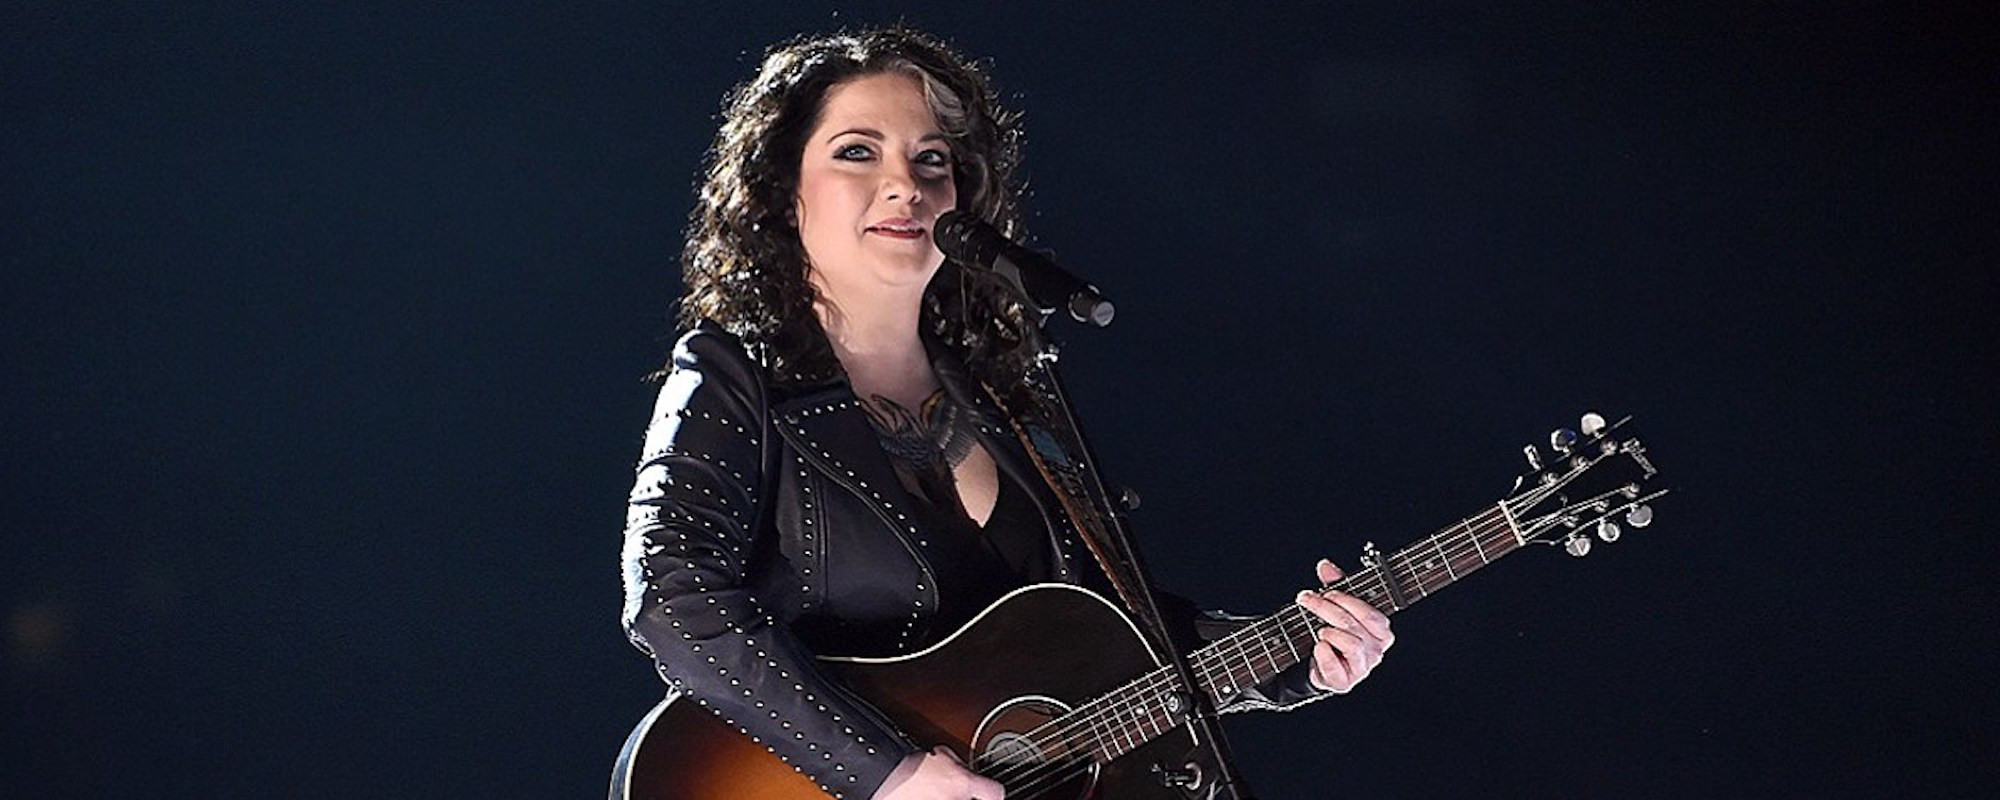 Behind the Song: “Girl Goin’ Nowhere” by Ashley McBryde